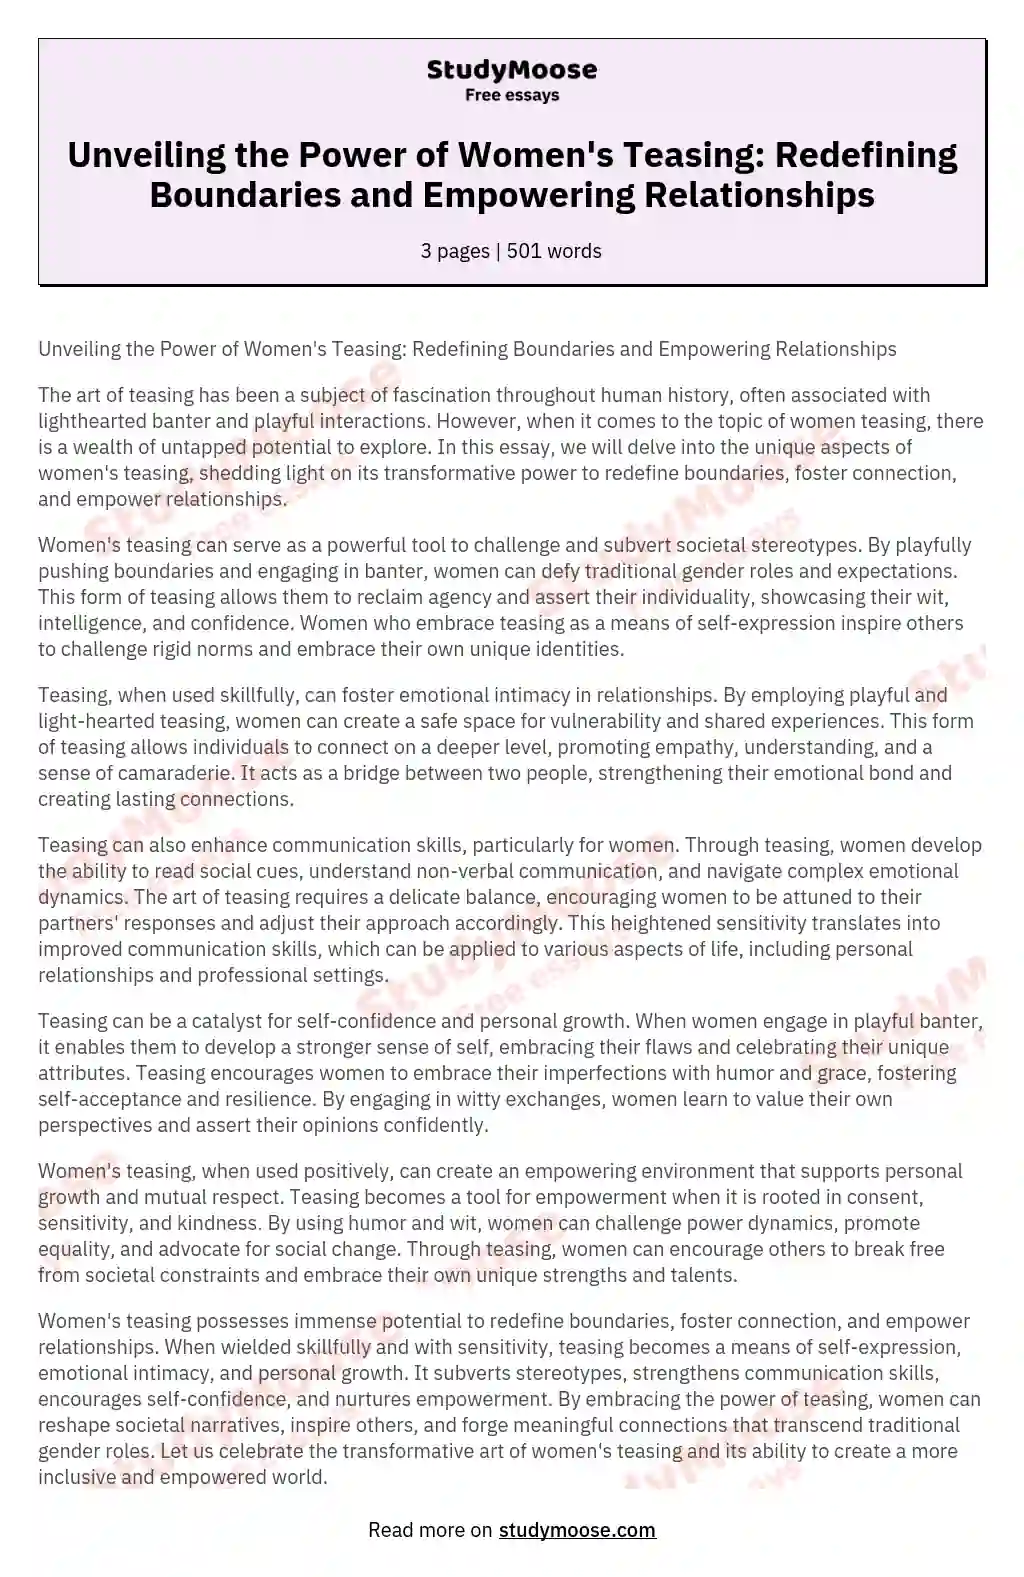 Unveiling the Power of Women's Teasing: Redefining Boundaries and Empowering Relationships essay